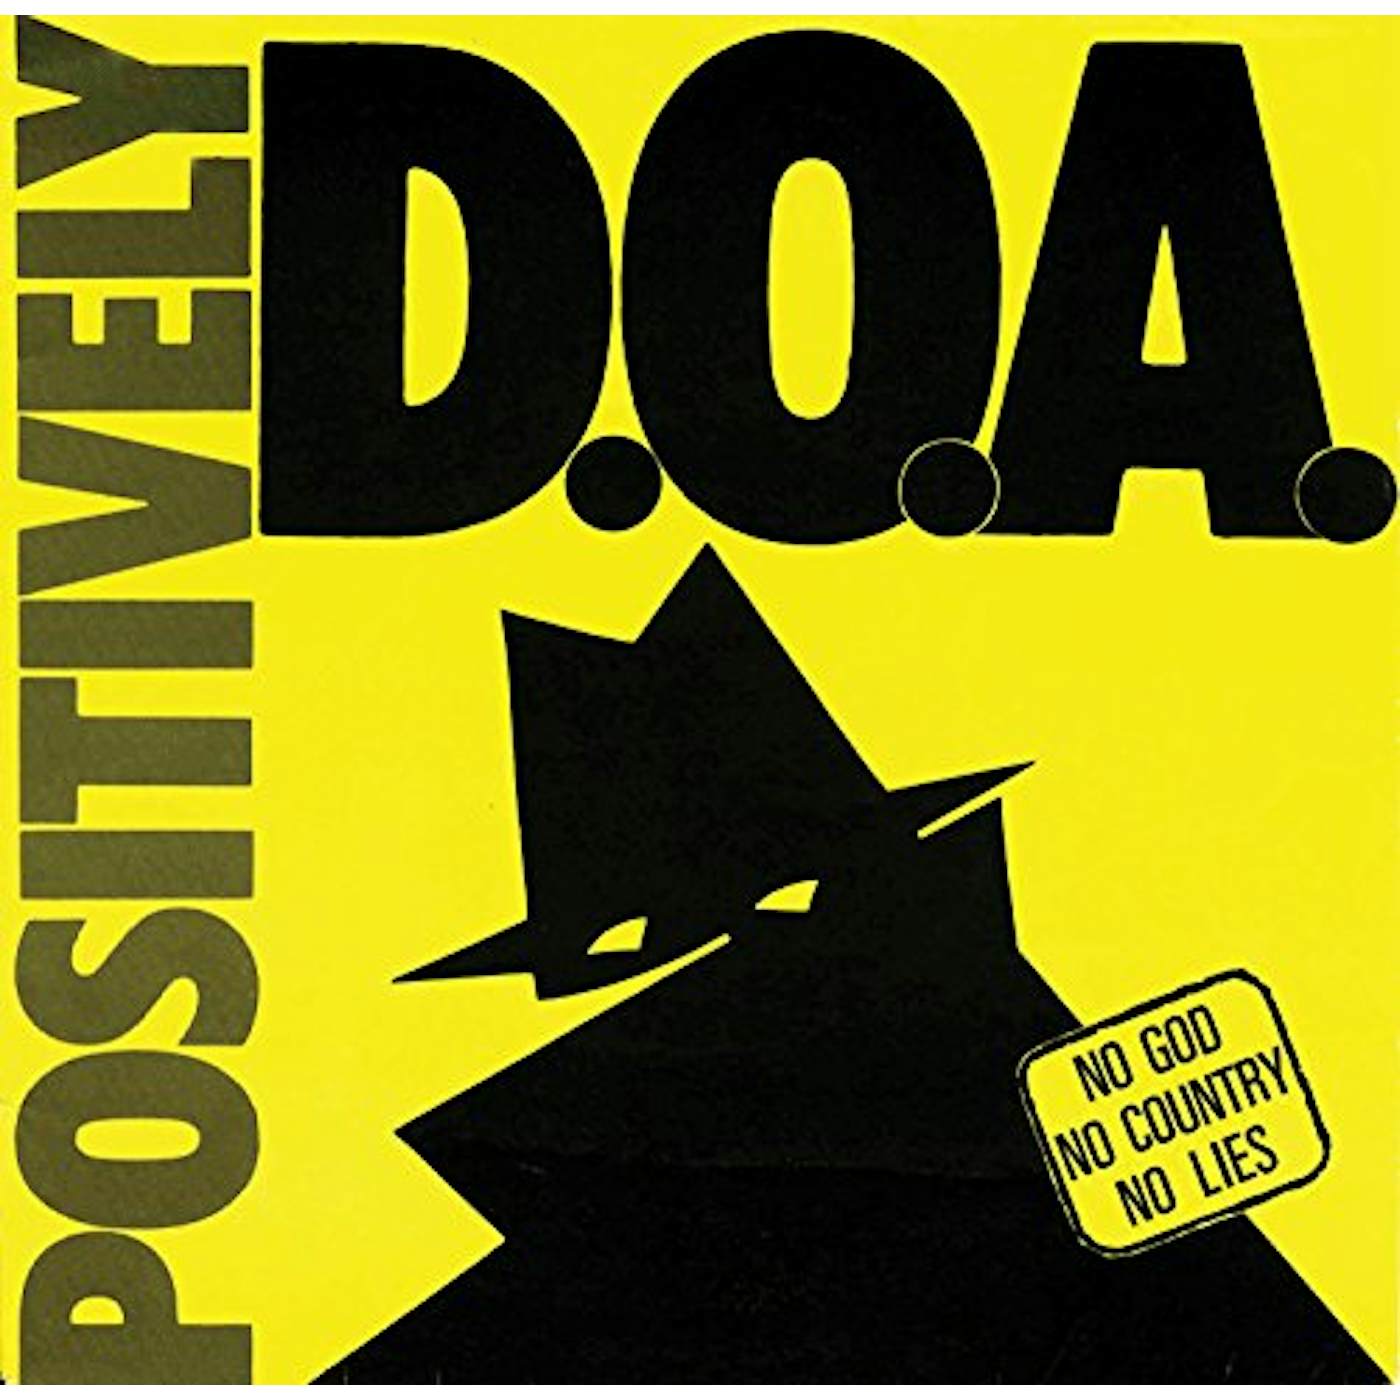 POSITIVELY D.O.A.-33RD ANNIVERSARY REISSUE Vinyl Record